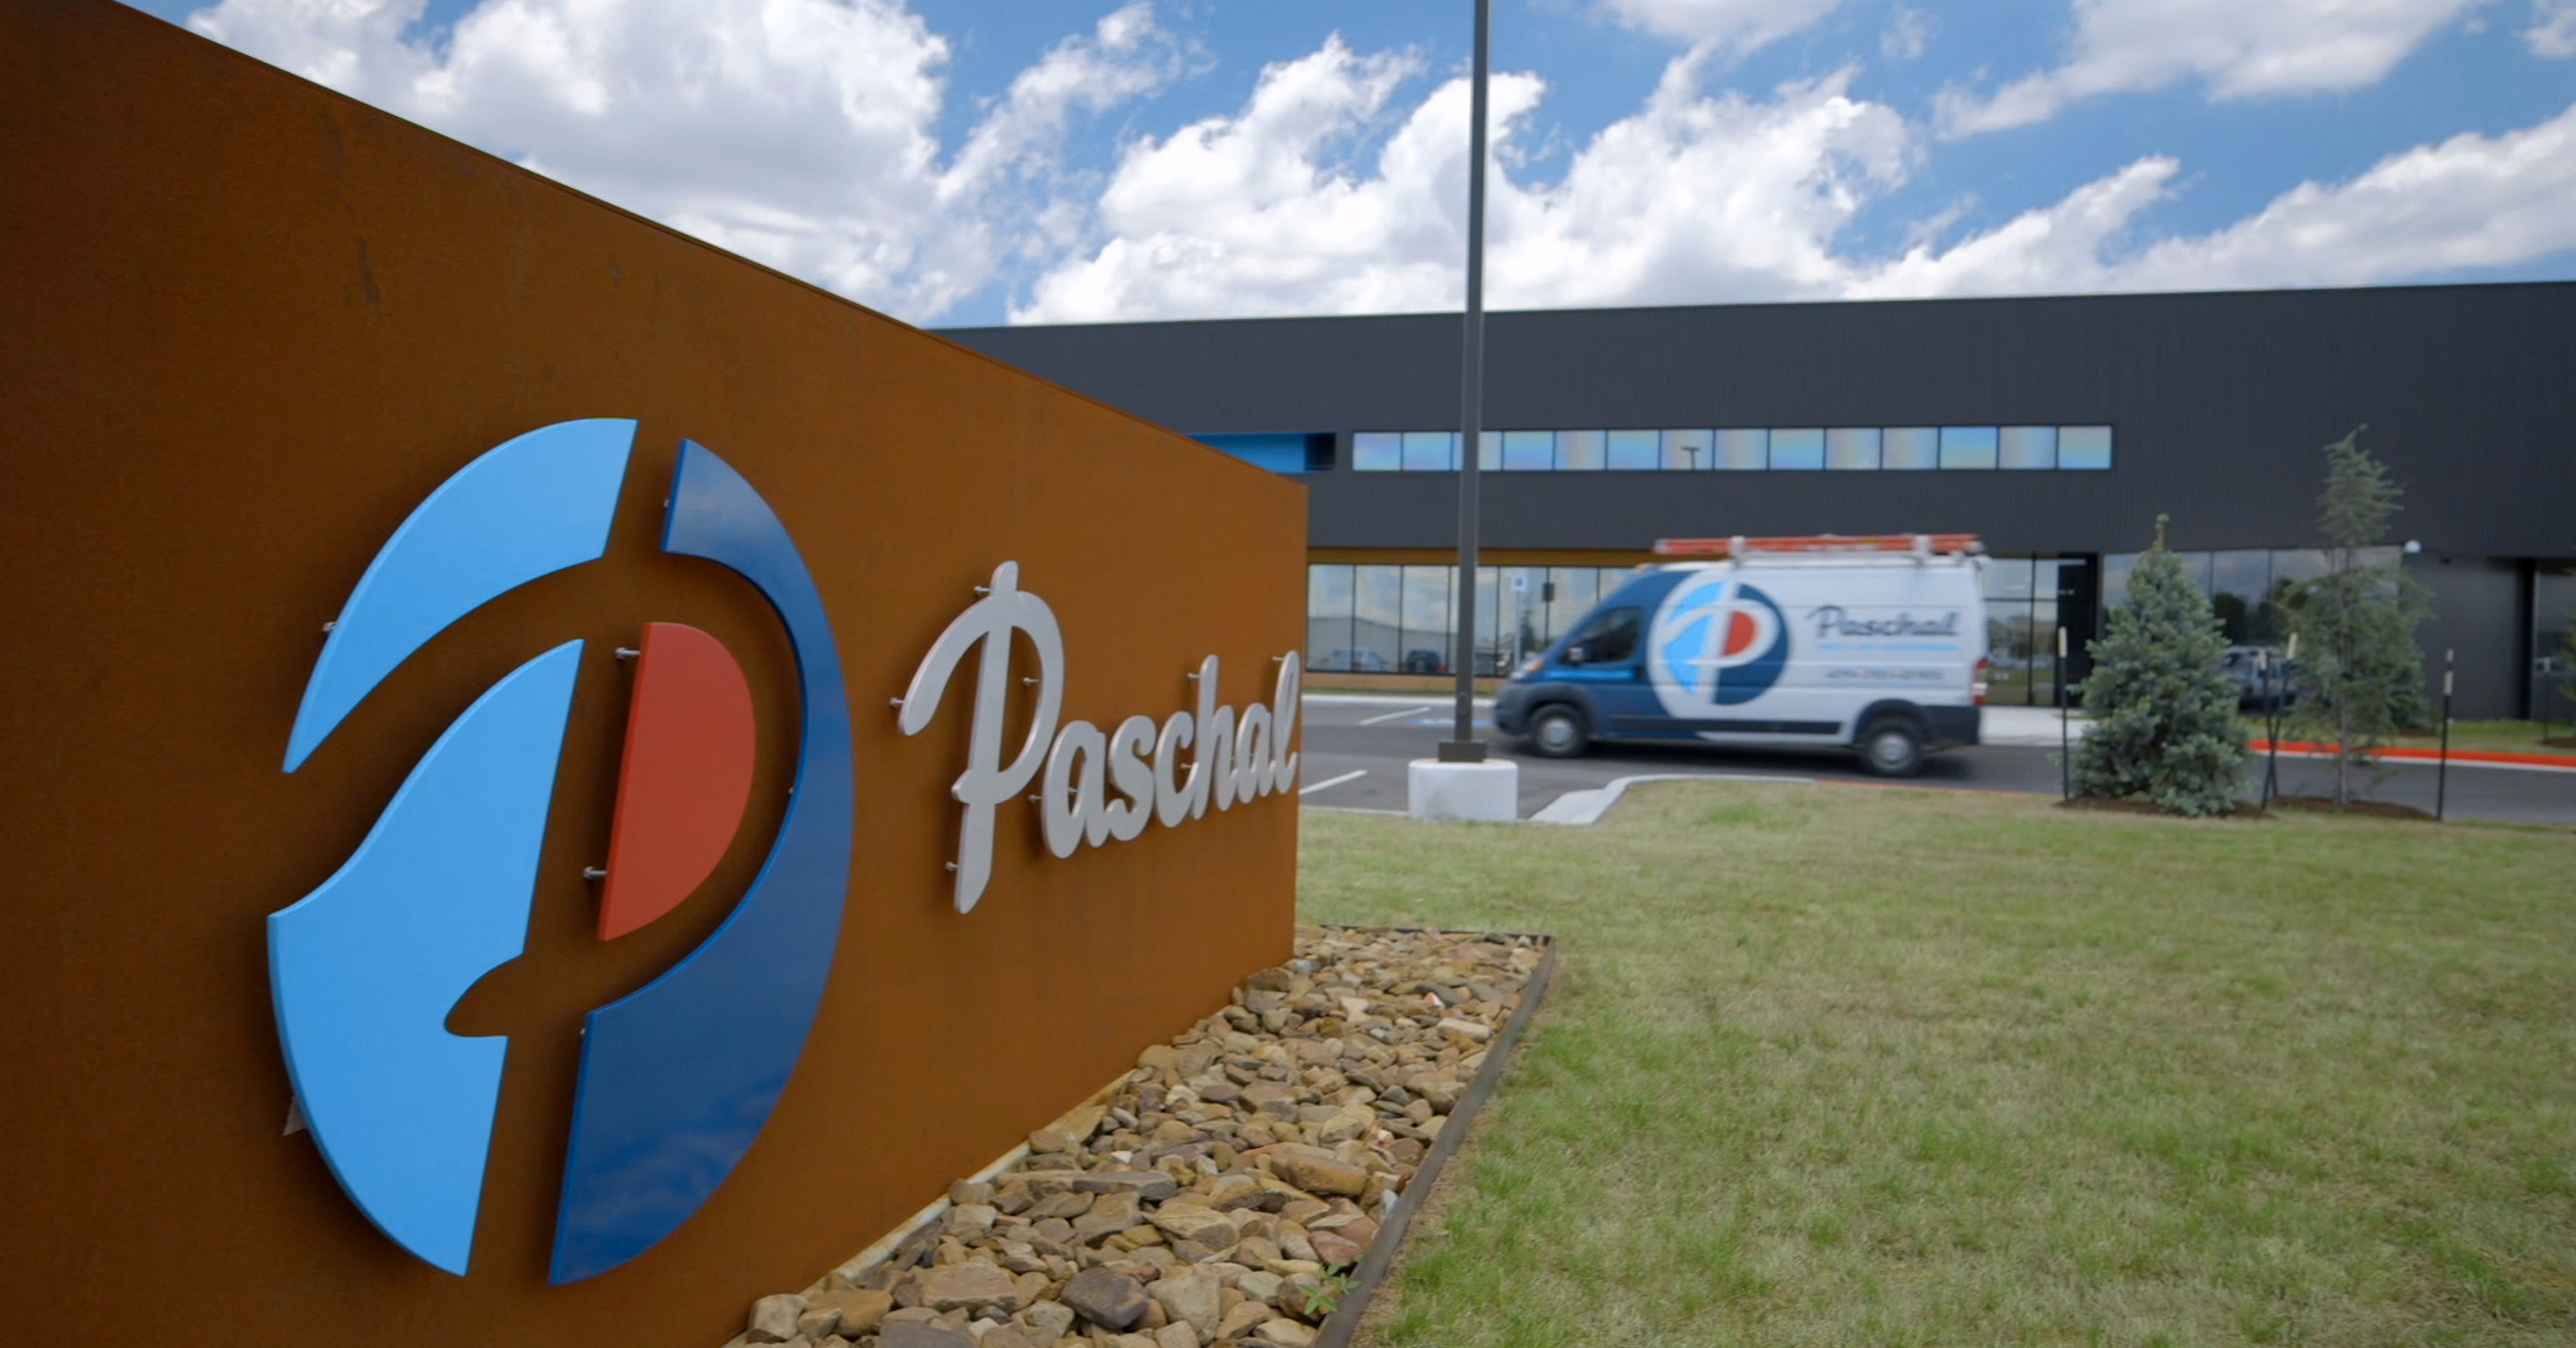 Paschal simplifies the chaos of managing thousands of maintenance customers.